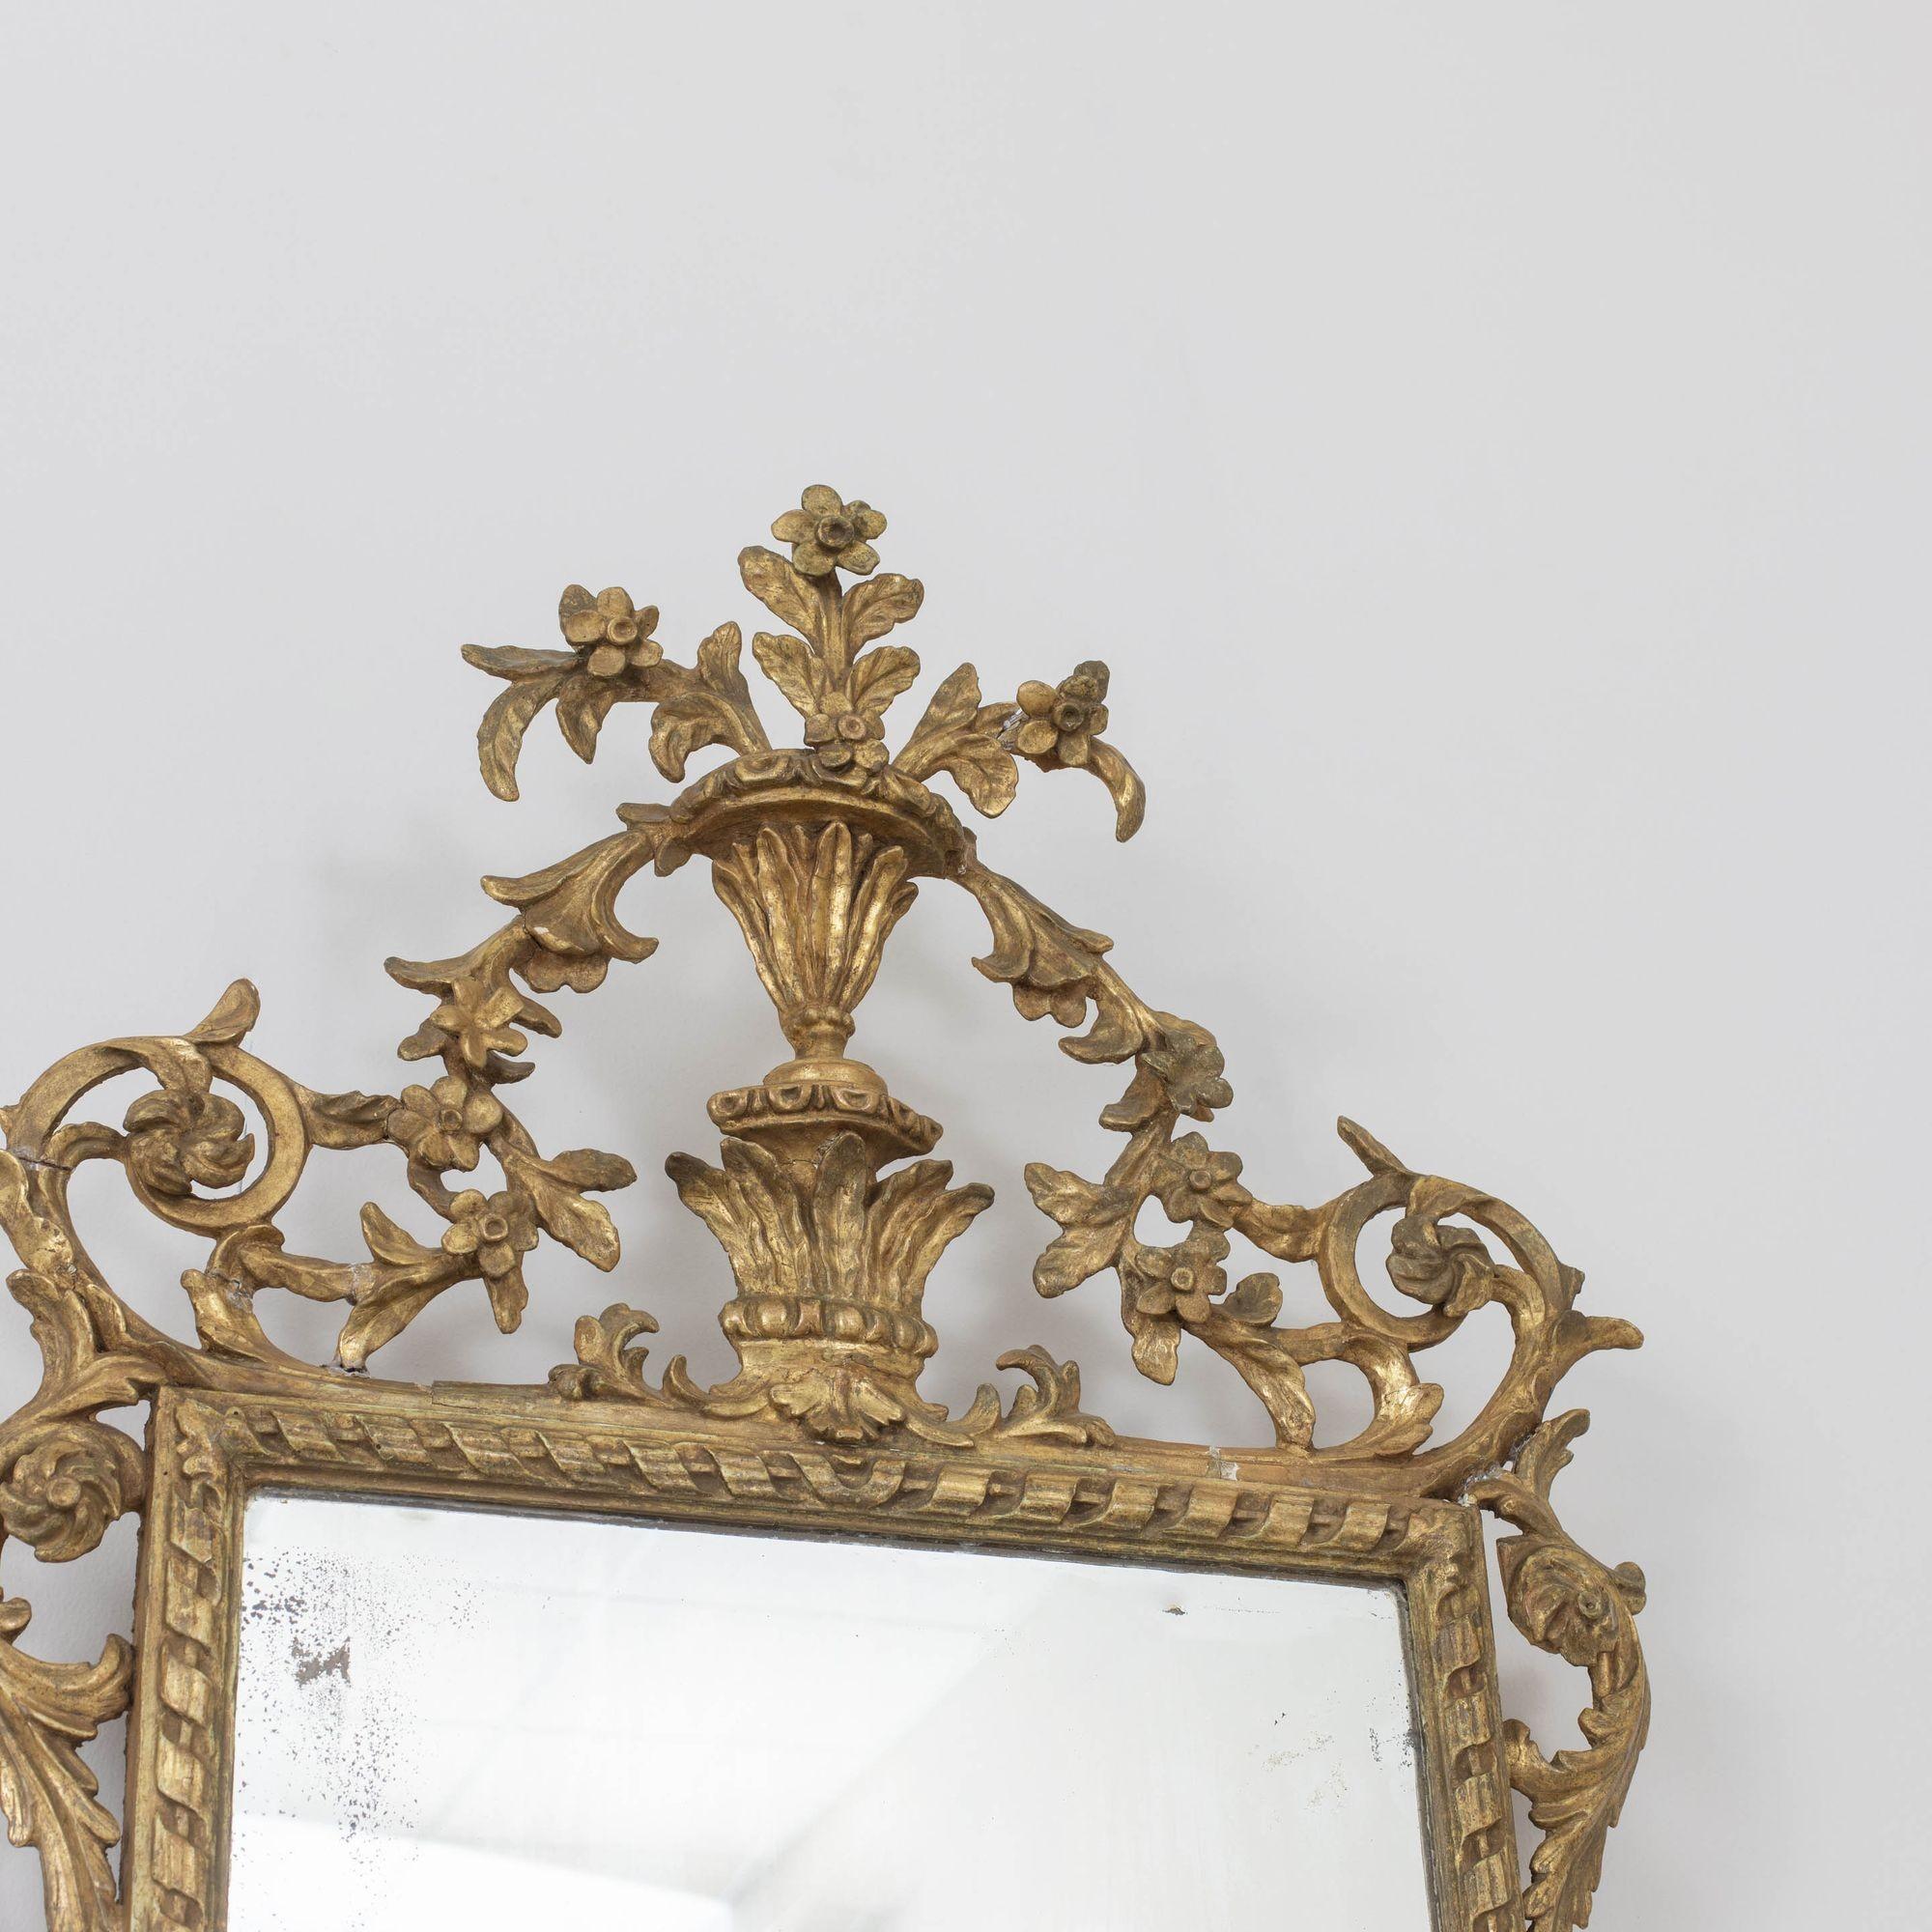 19th Century 19th c. Italian Giltwood Mirror with Original Mirror Plate For Sale